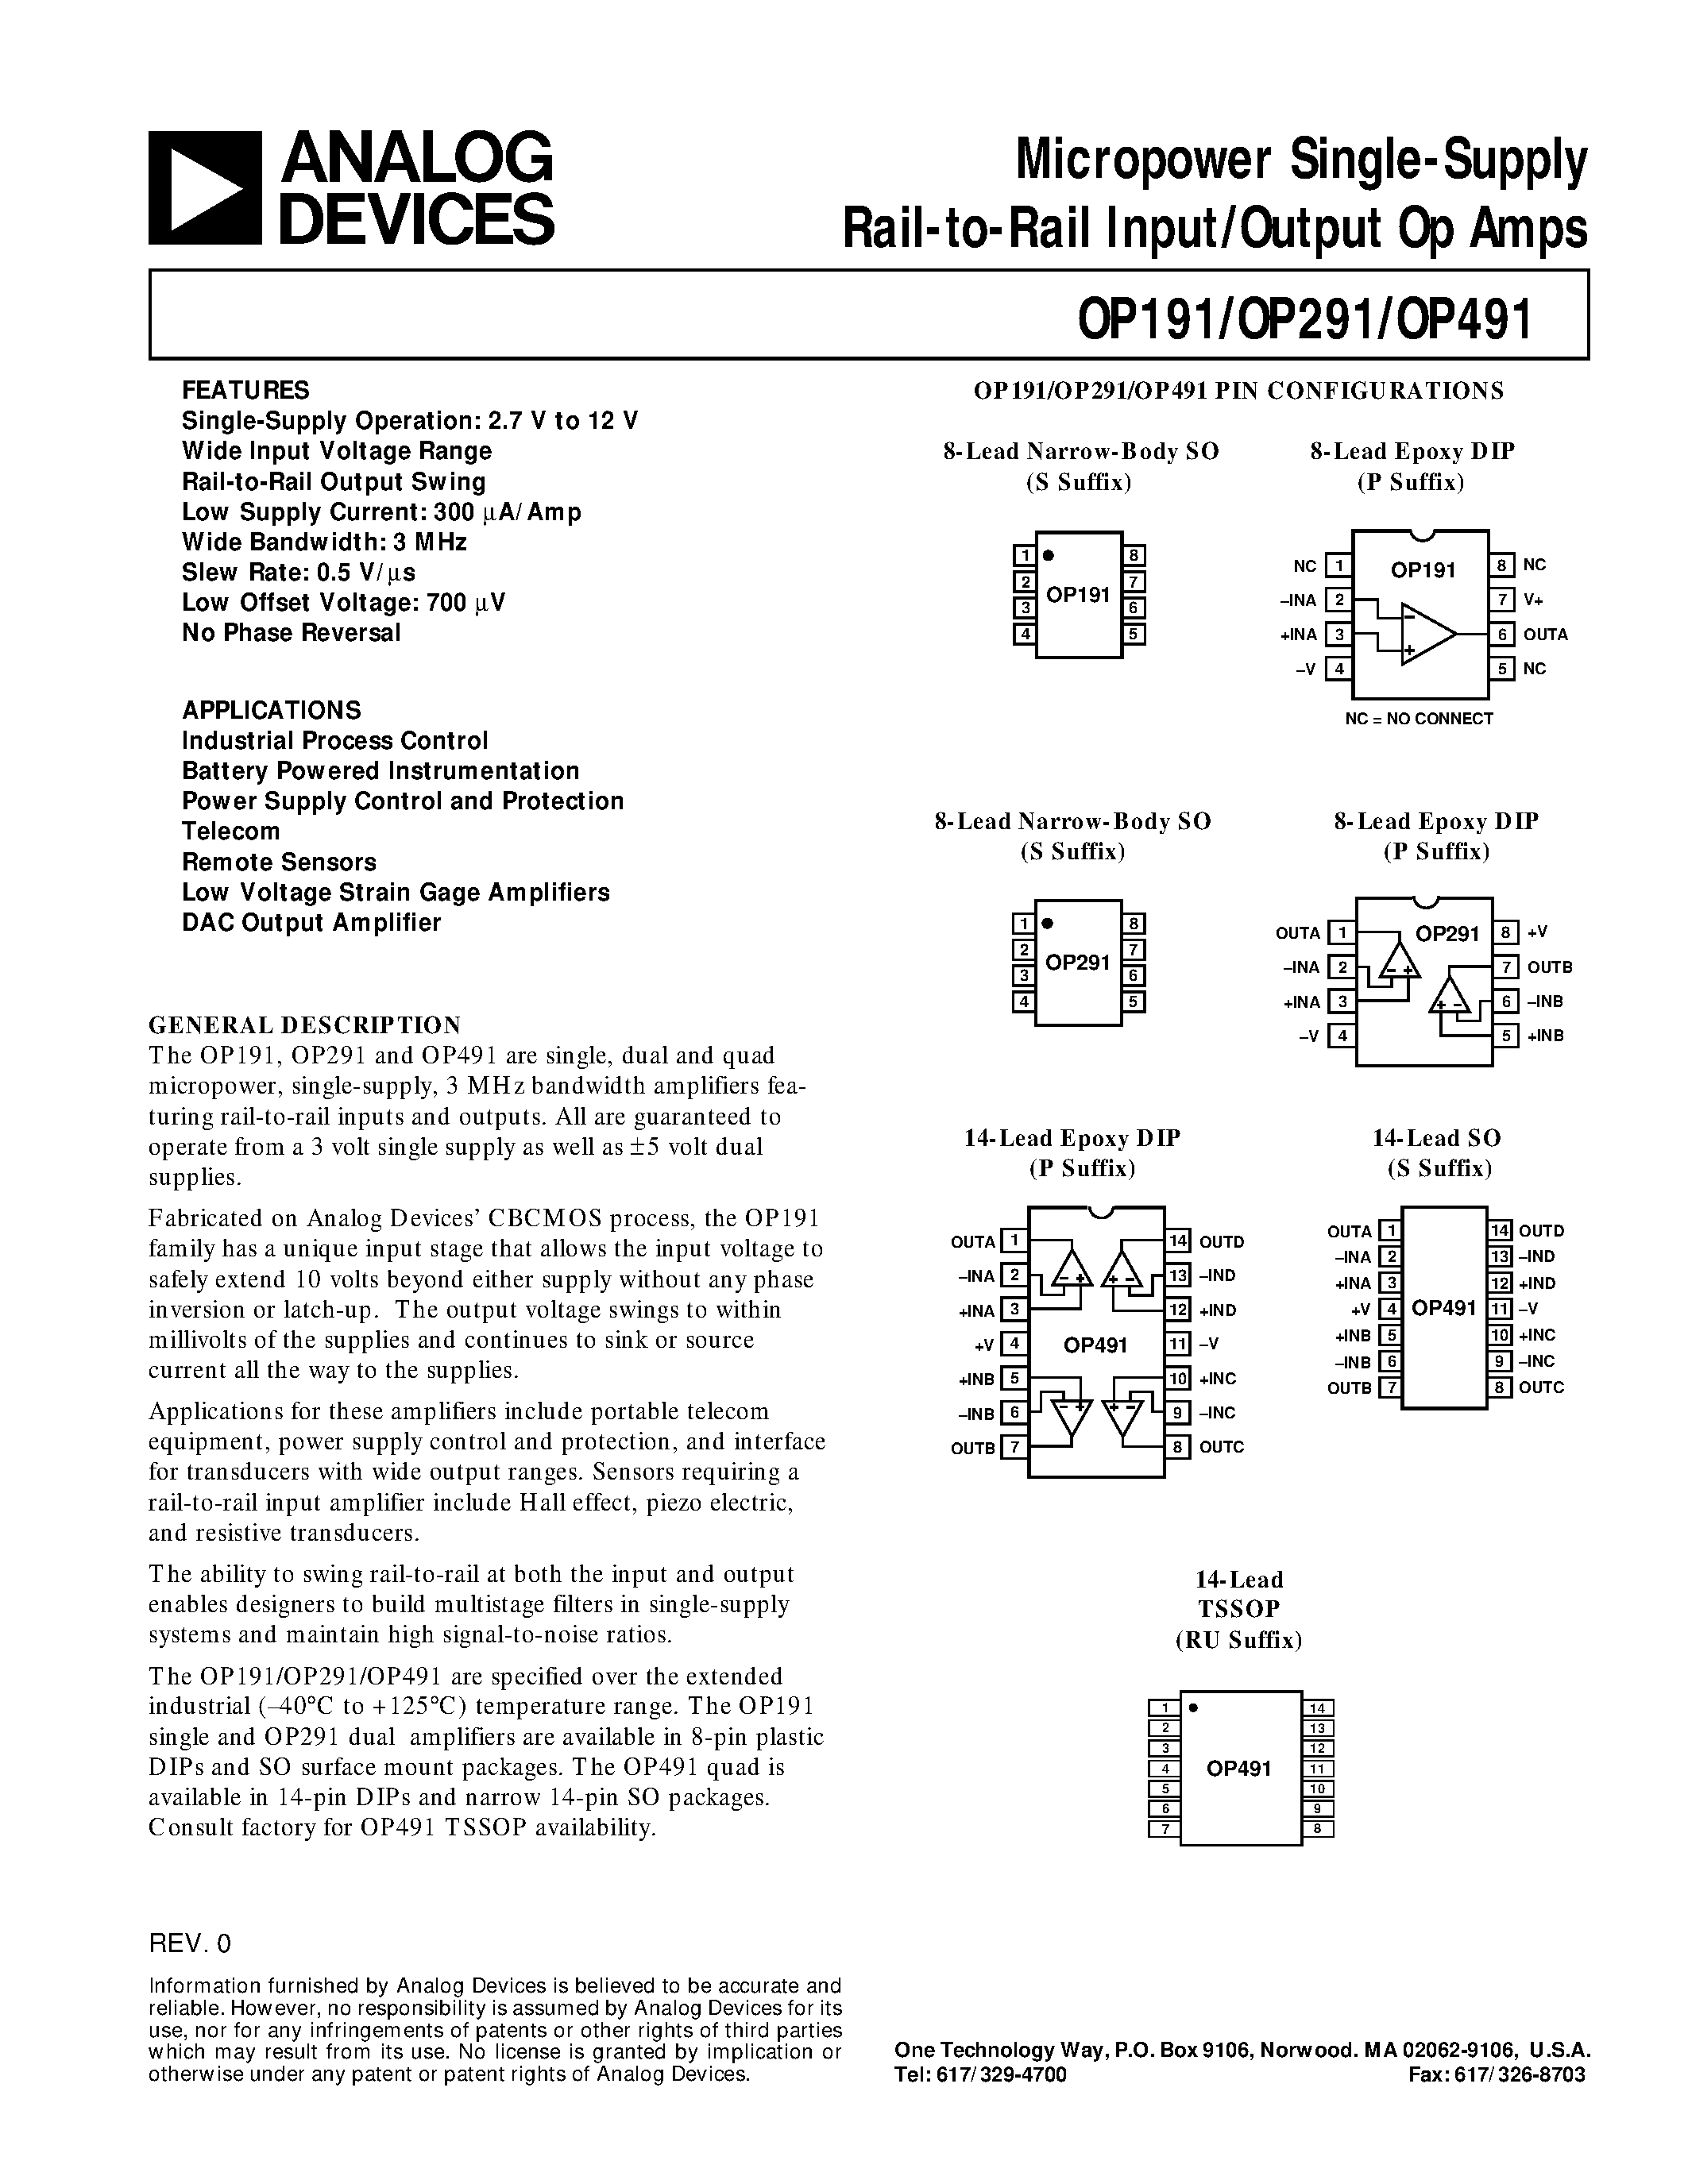 Datasheet OP291 - Micropower Single-Supply Rail-to-Rail Input/Output Op Amps page 1